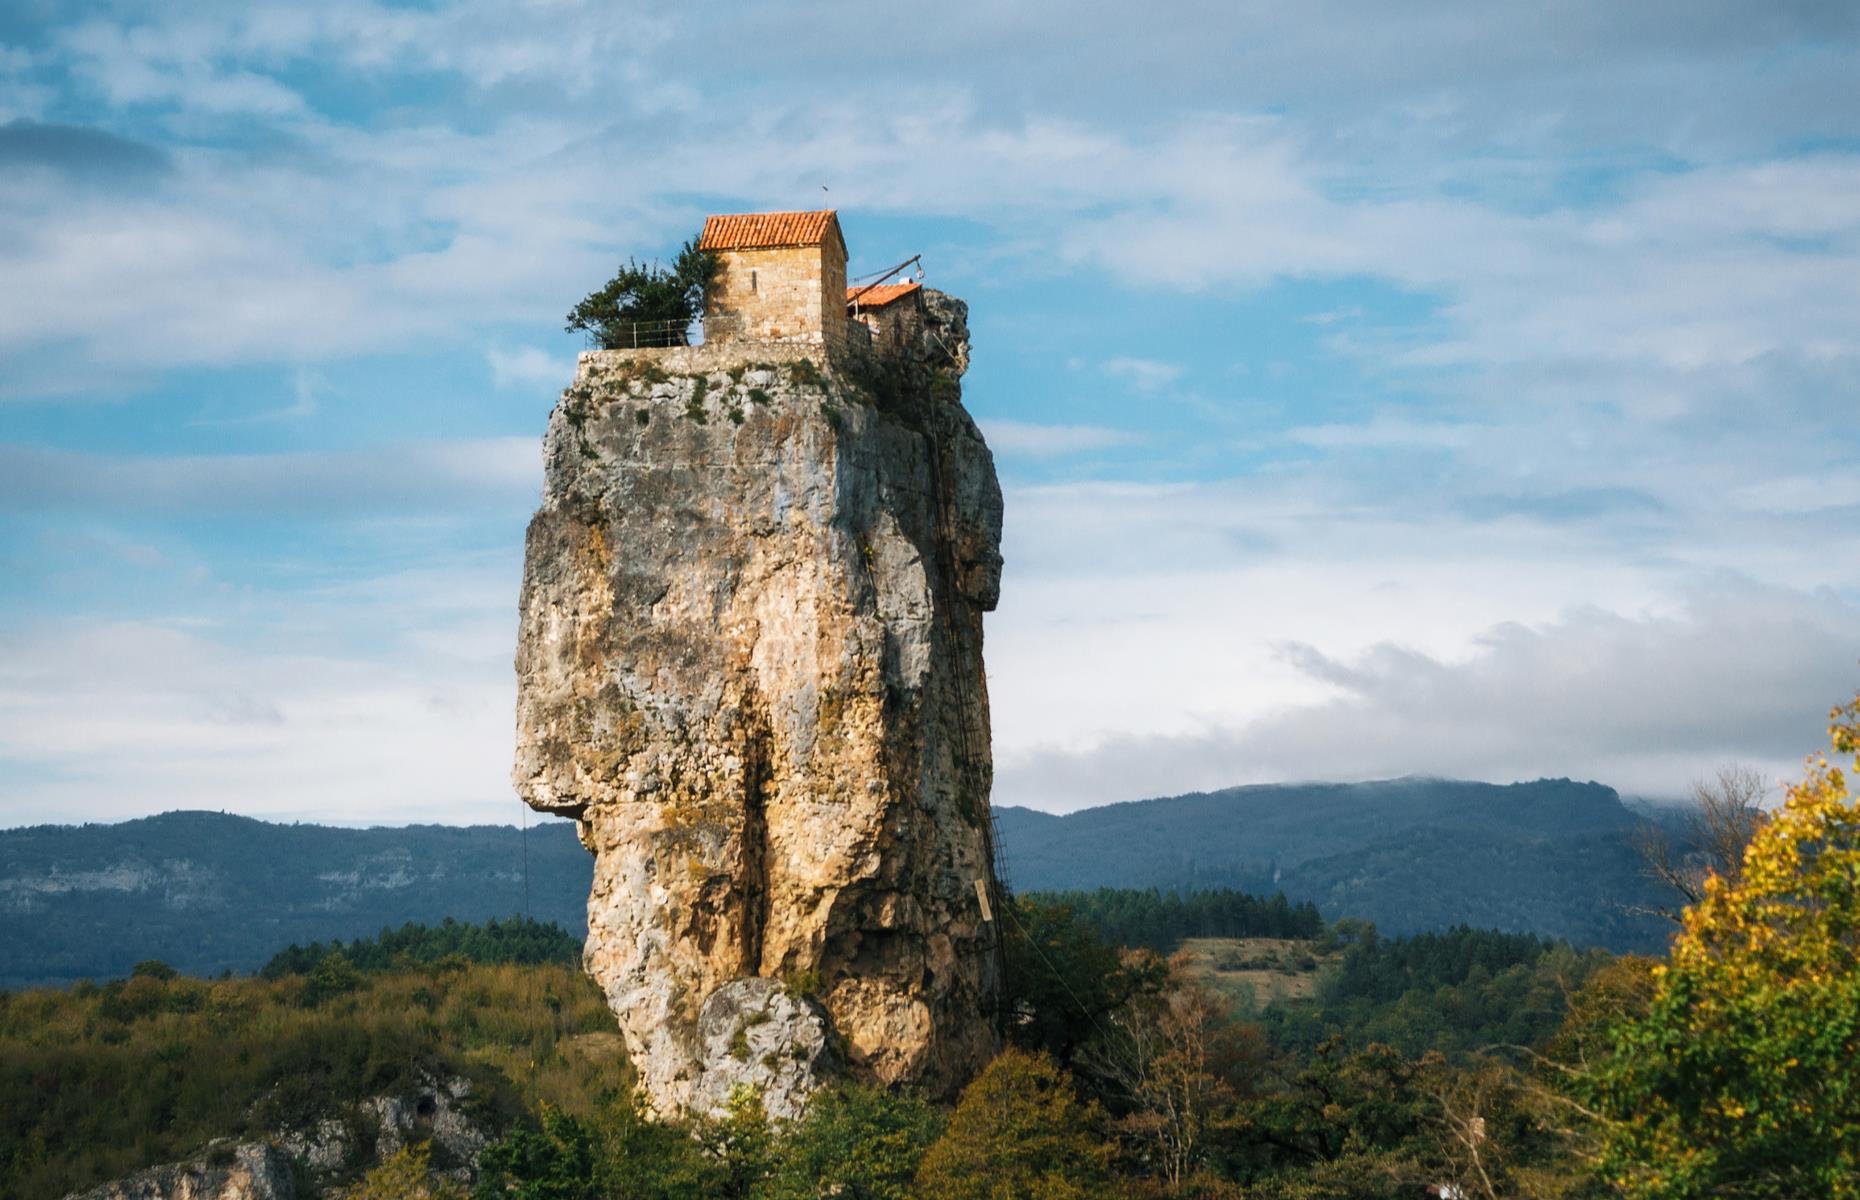 <p>Nestled in the western Georgian region of Imereti, the Katskhi Pillar takes extreme living to new heights. Towering 130 feet, the stone column is home to a church, built in the 6th- to 8th-centuries, a burial chamber and a cottage. An iconic religious landmark in the area, the precarious spot has also housed one devout monk for over 20 years.</p>